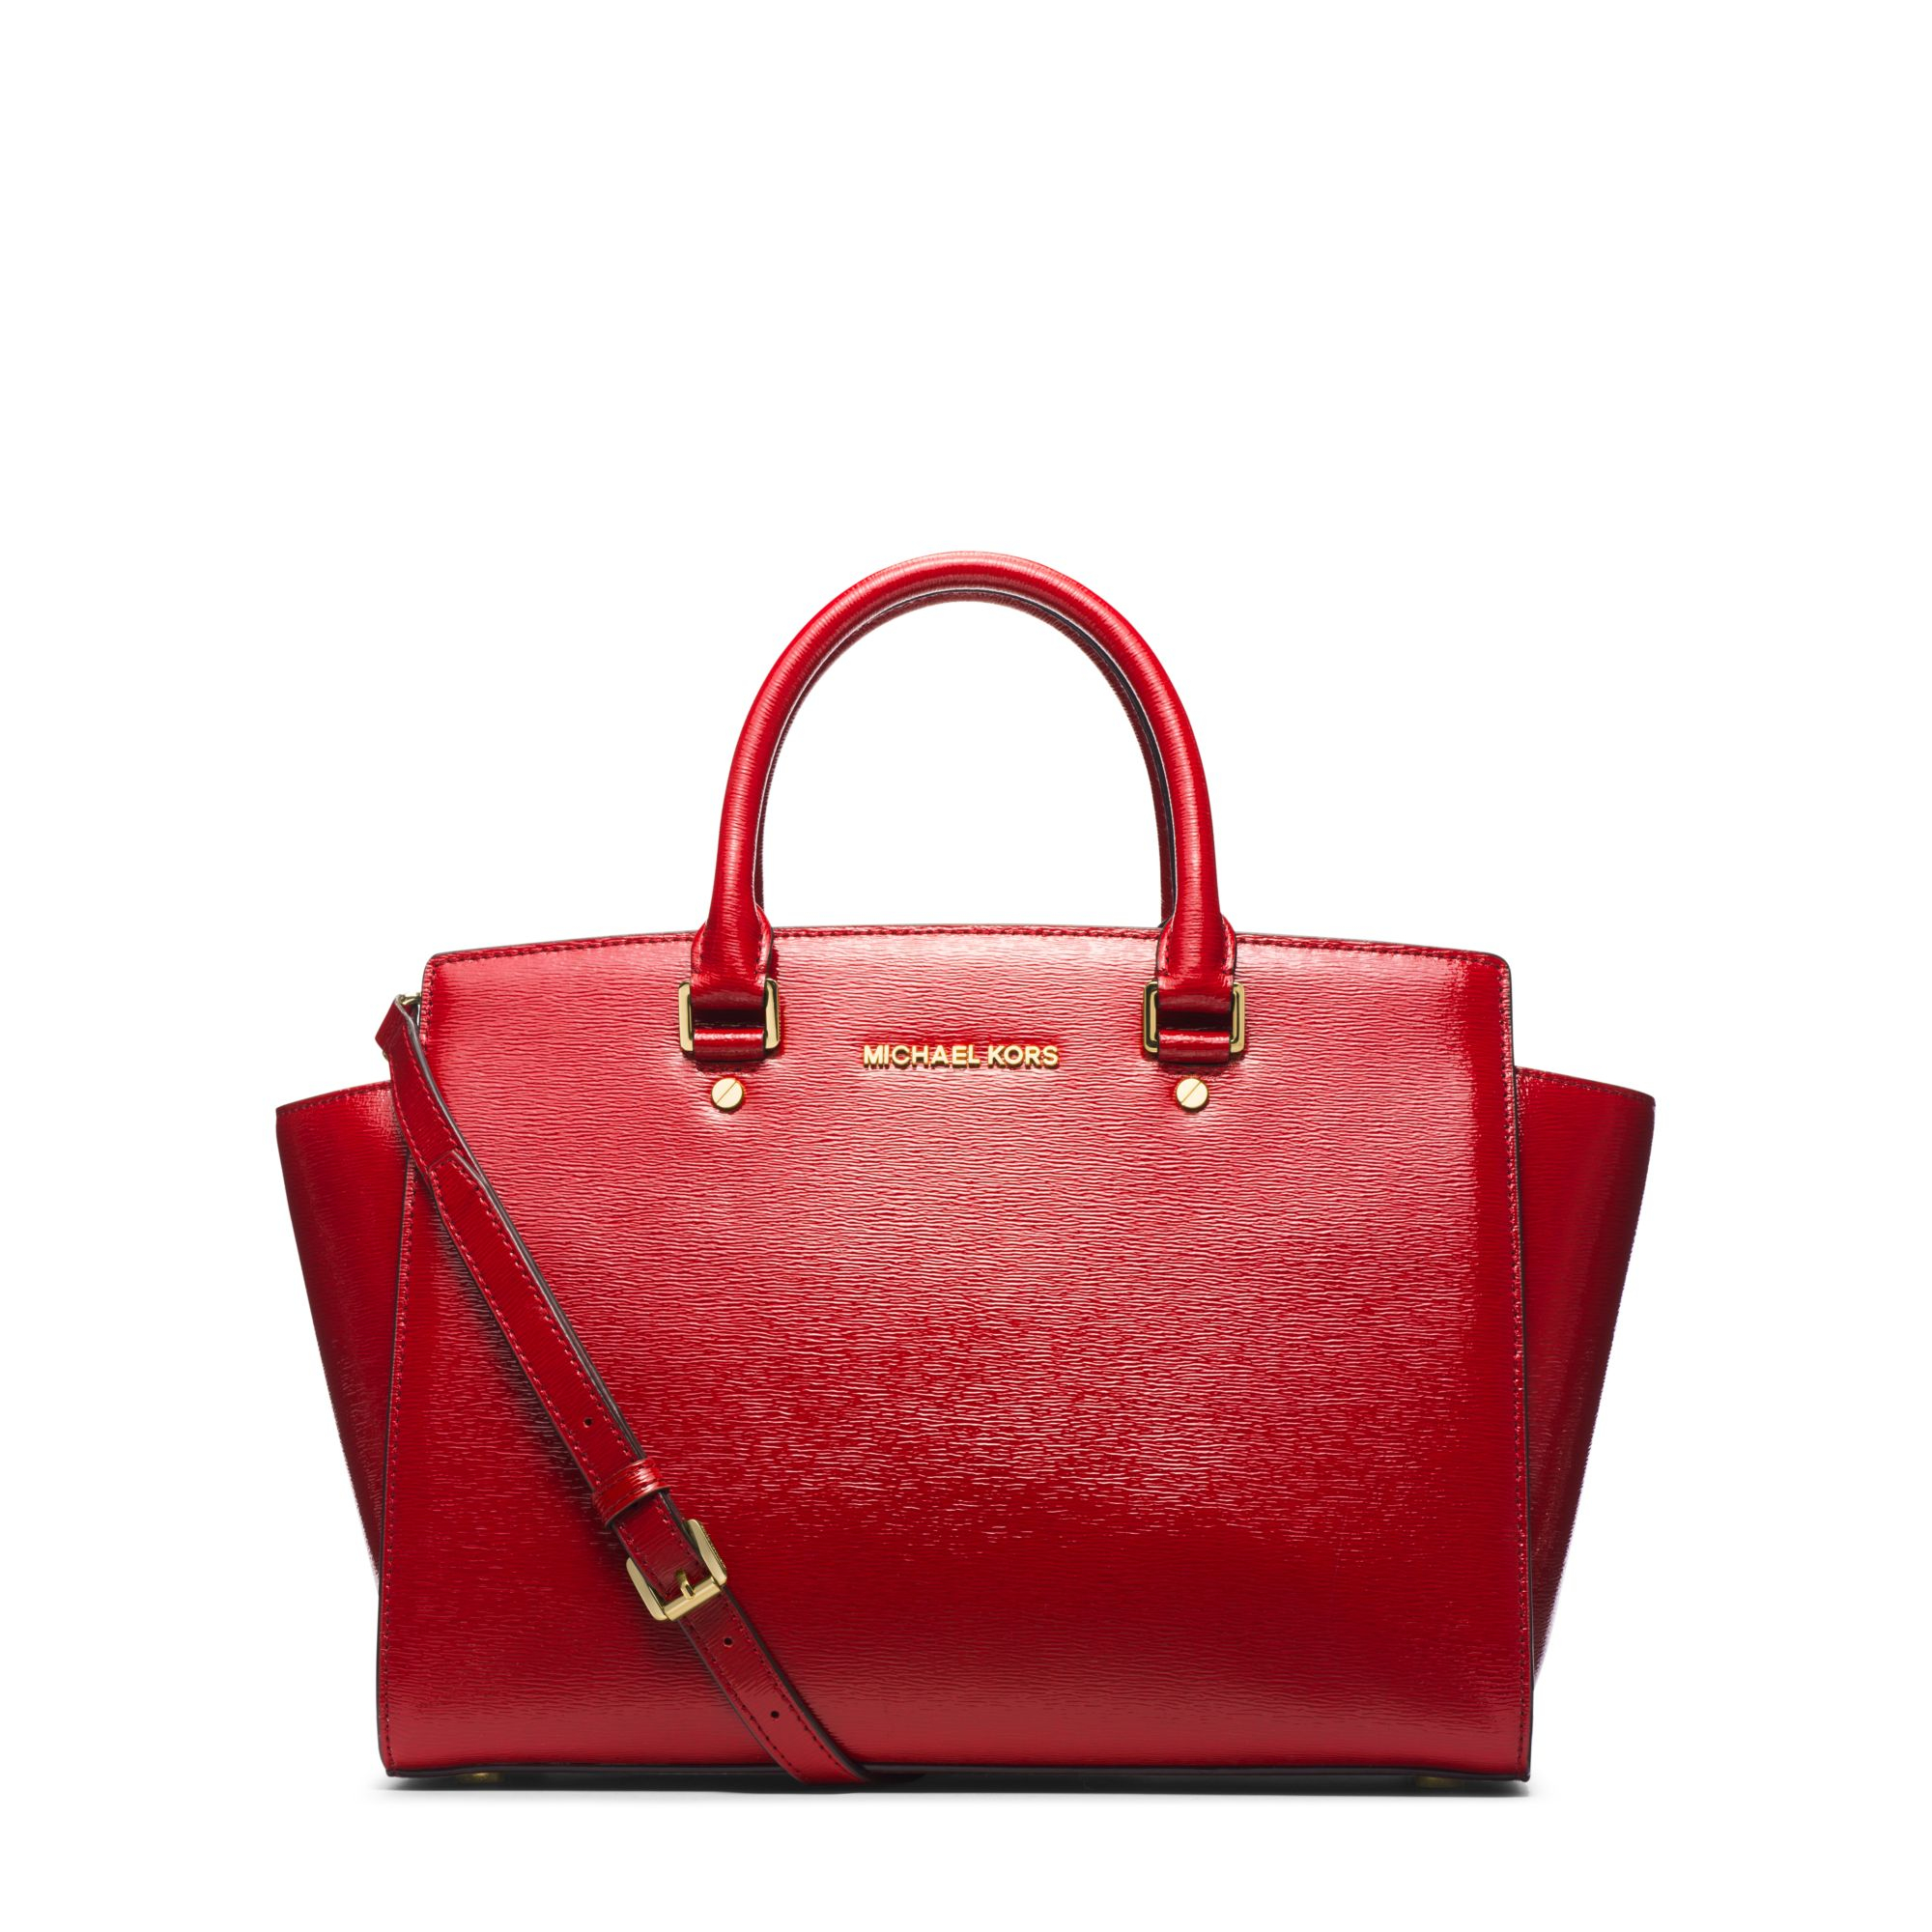 Lyst - Michael Kors Selma Large Patent-Leather Satchel in Red